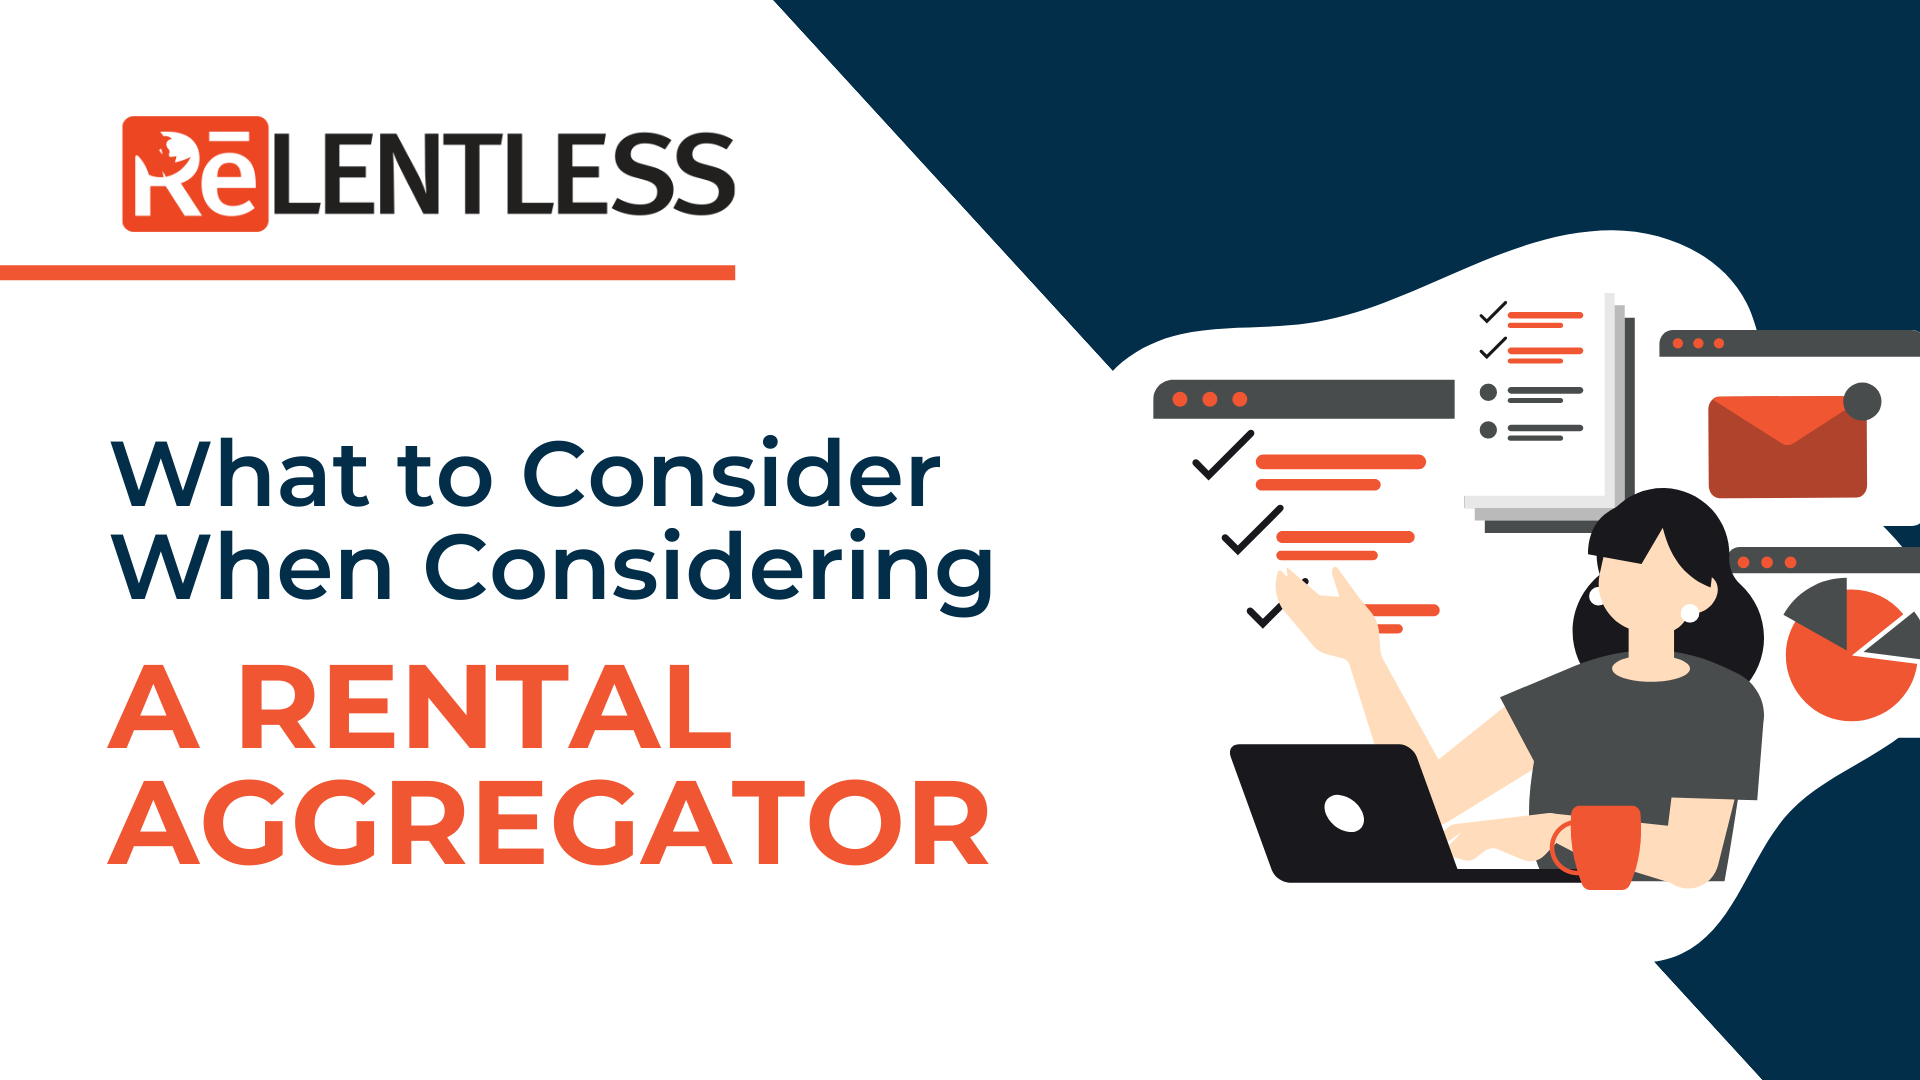 What to Consider When Considering a Rental Aggregator